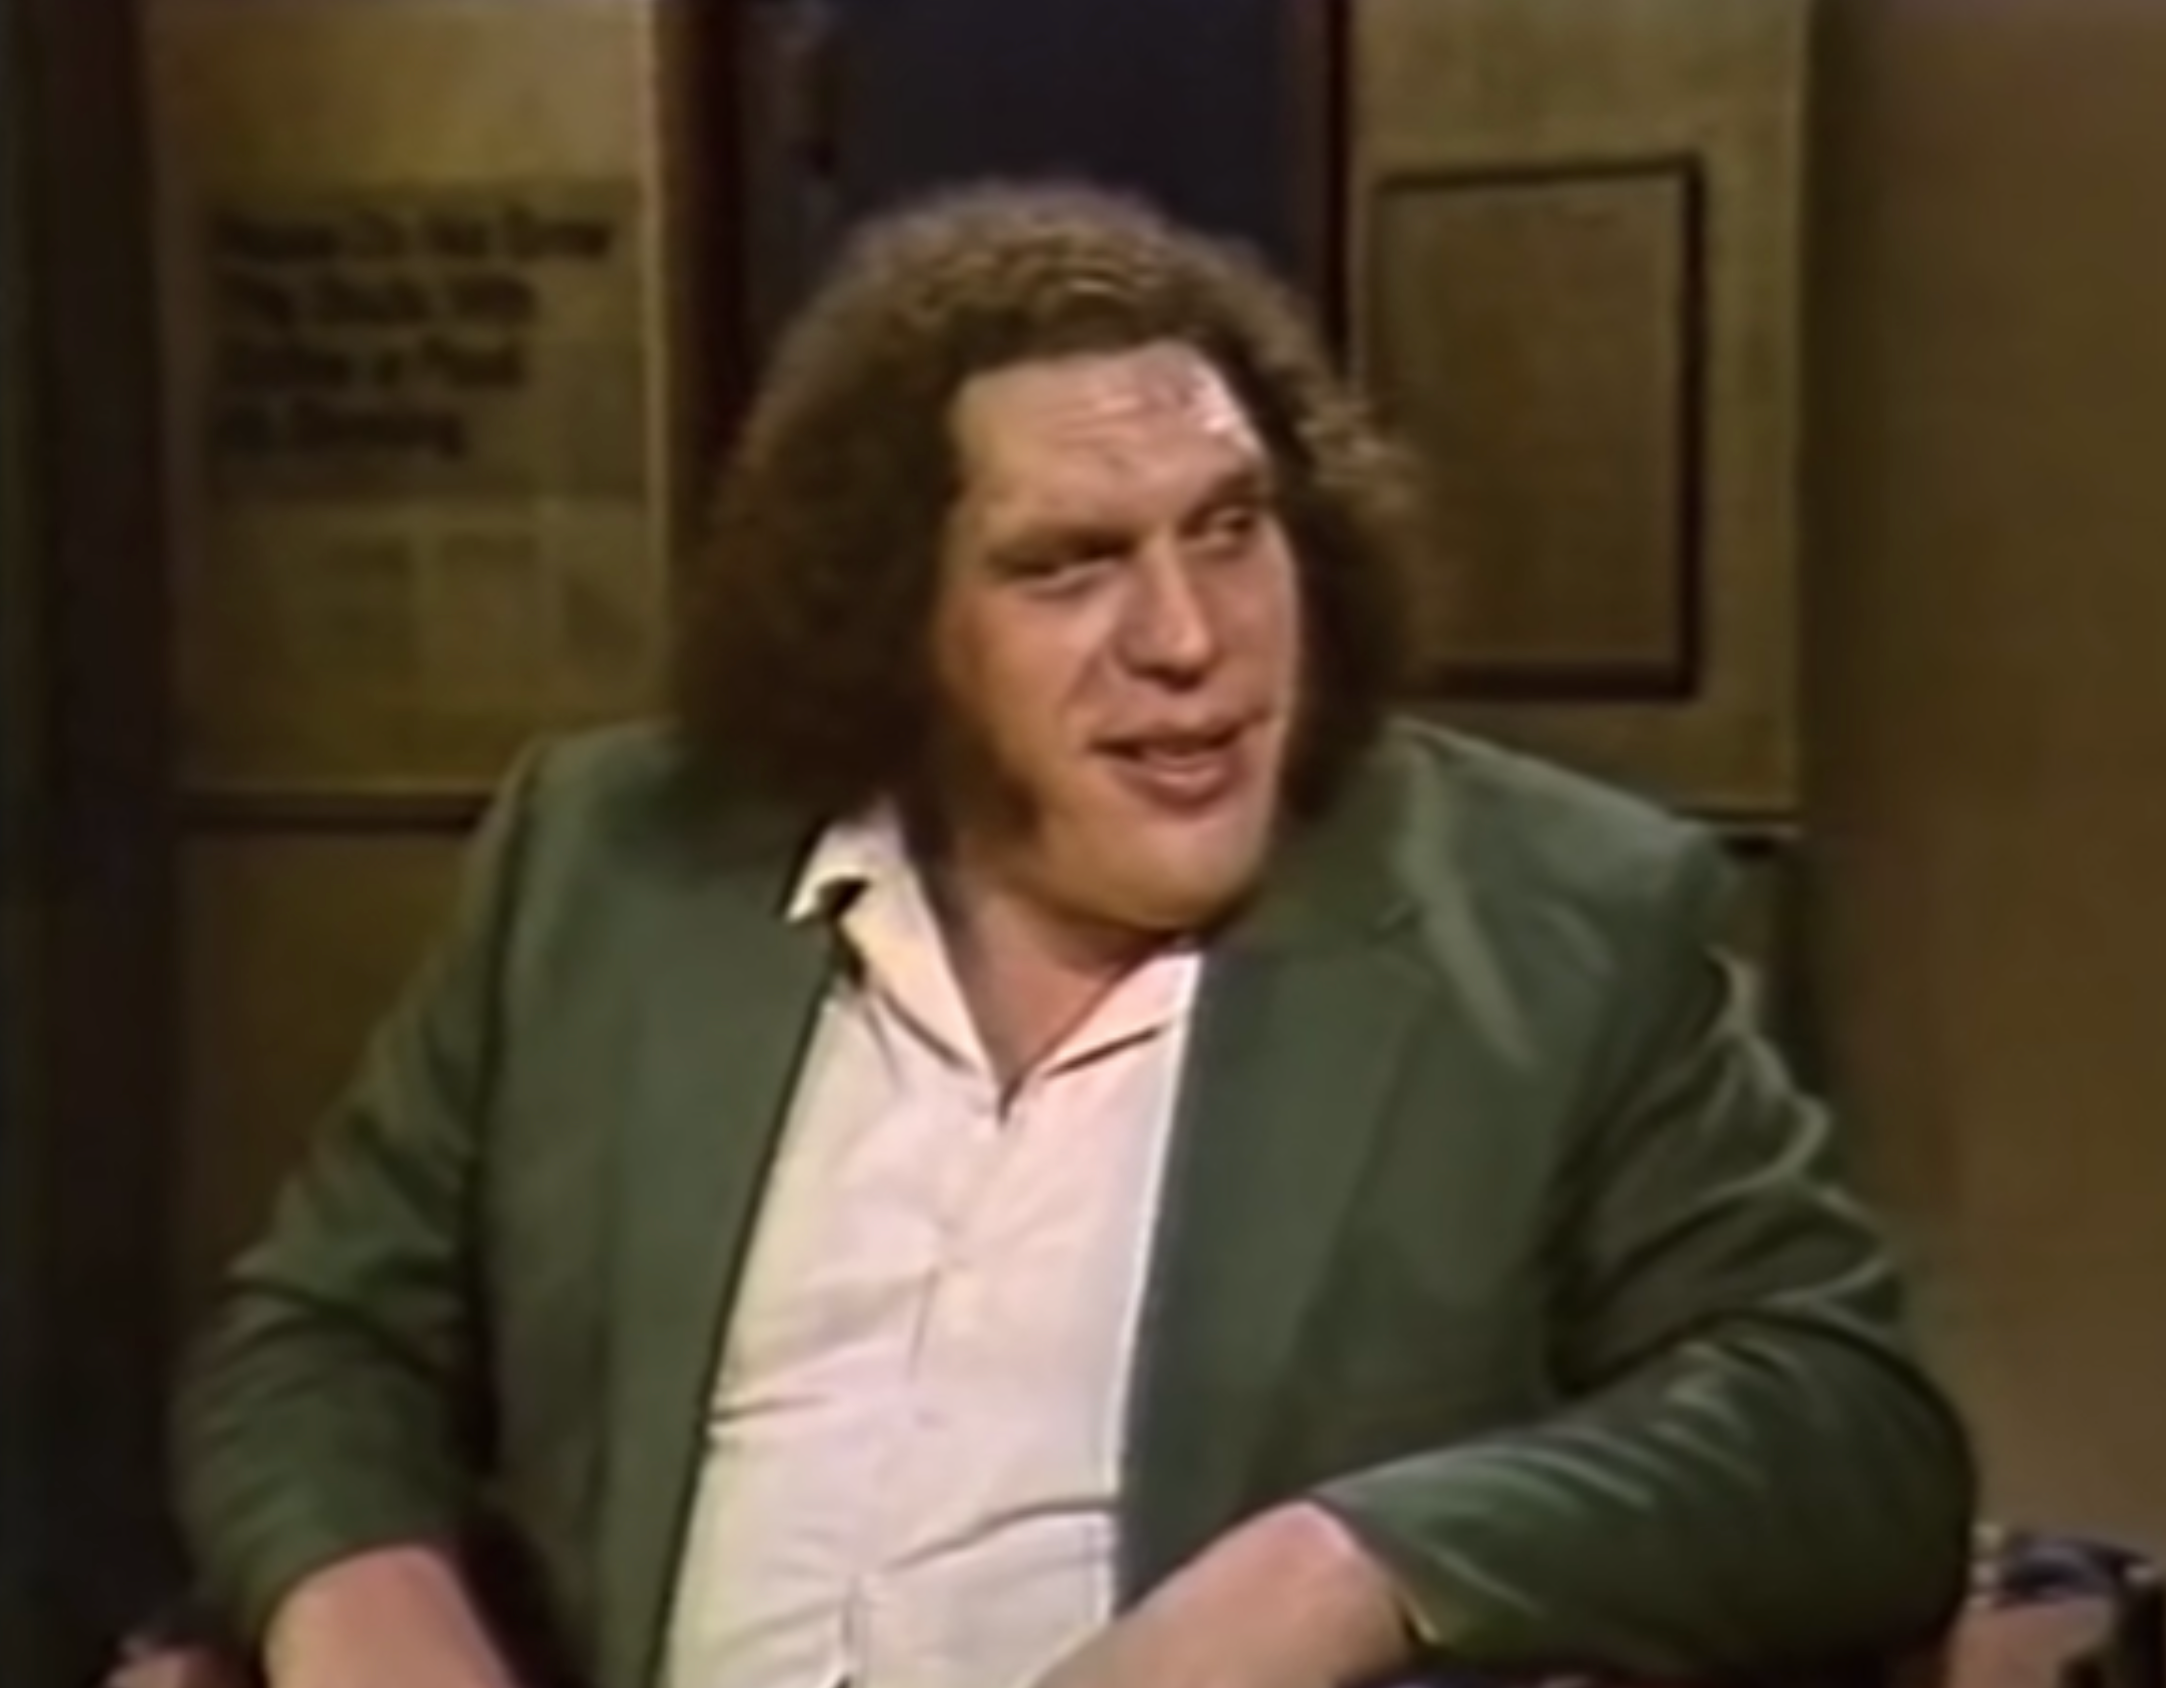 Andre The Giant once drank an incredible 117 beers in one night